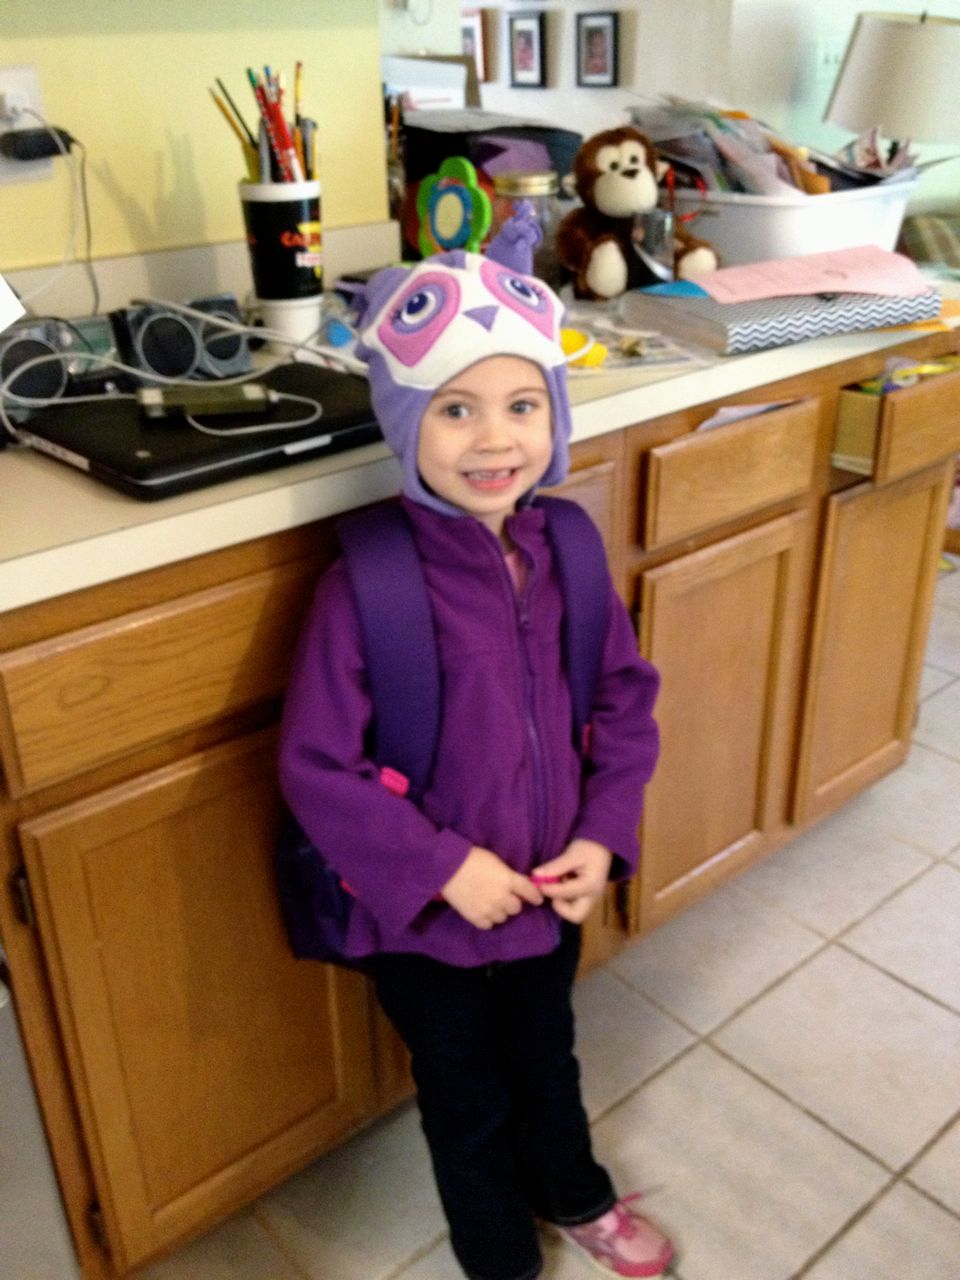  She's named her winter hat, Owly. Can you tell we love purple?!? 